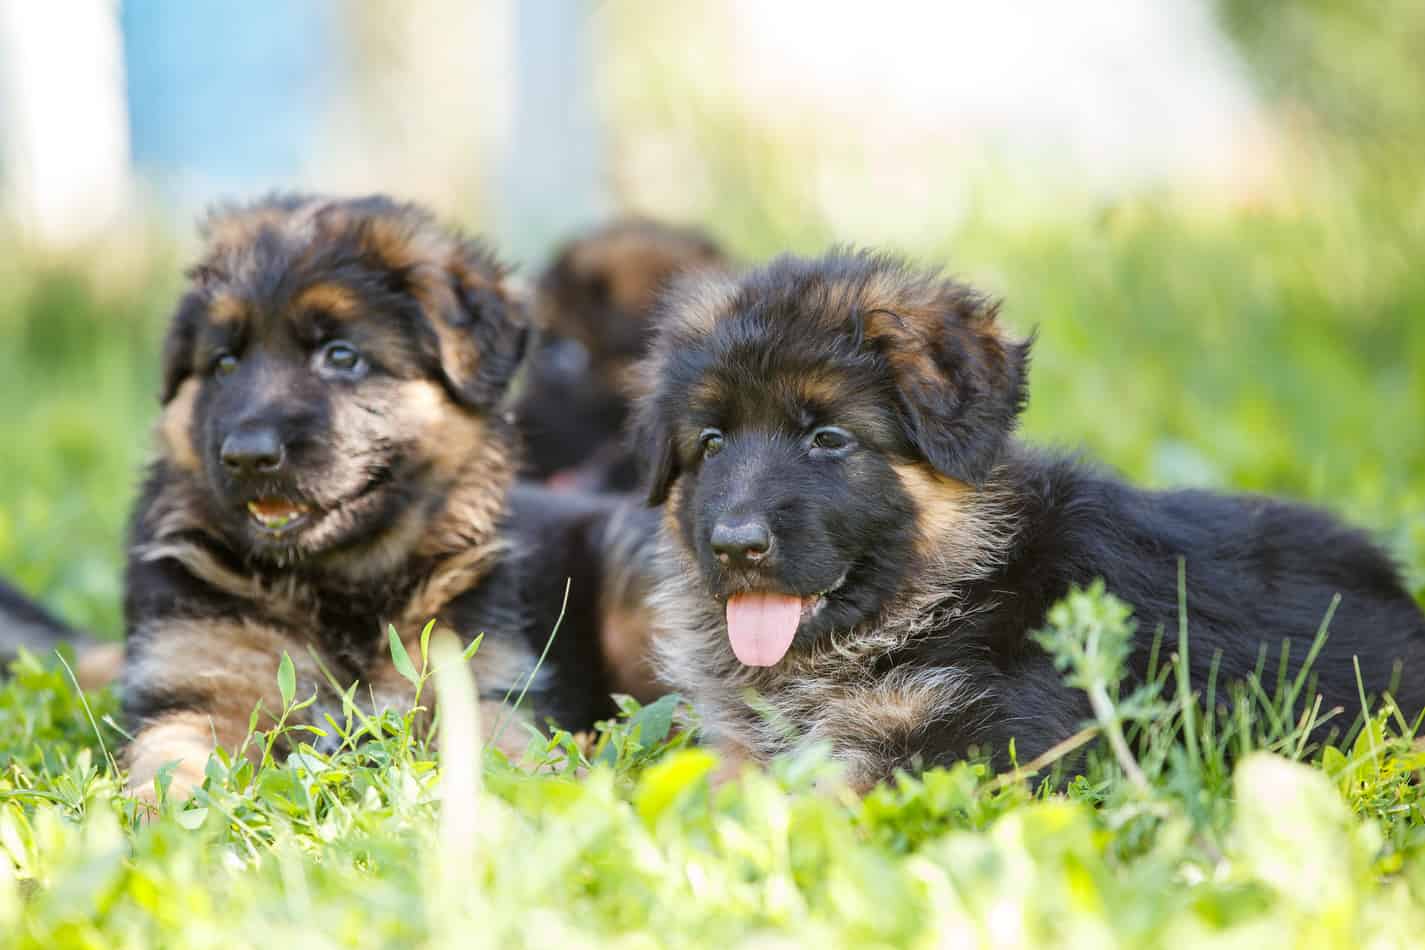 Germans spent $5bn on their pets in 2019